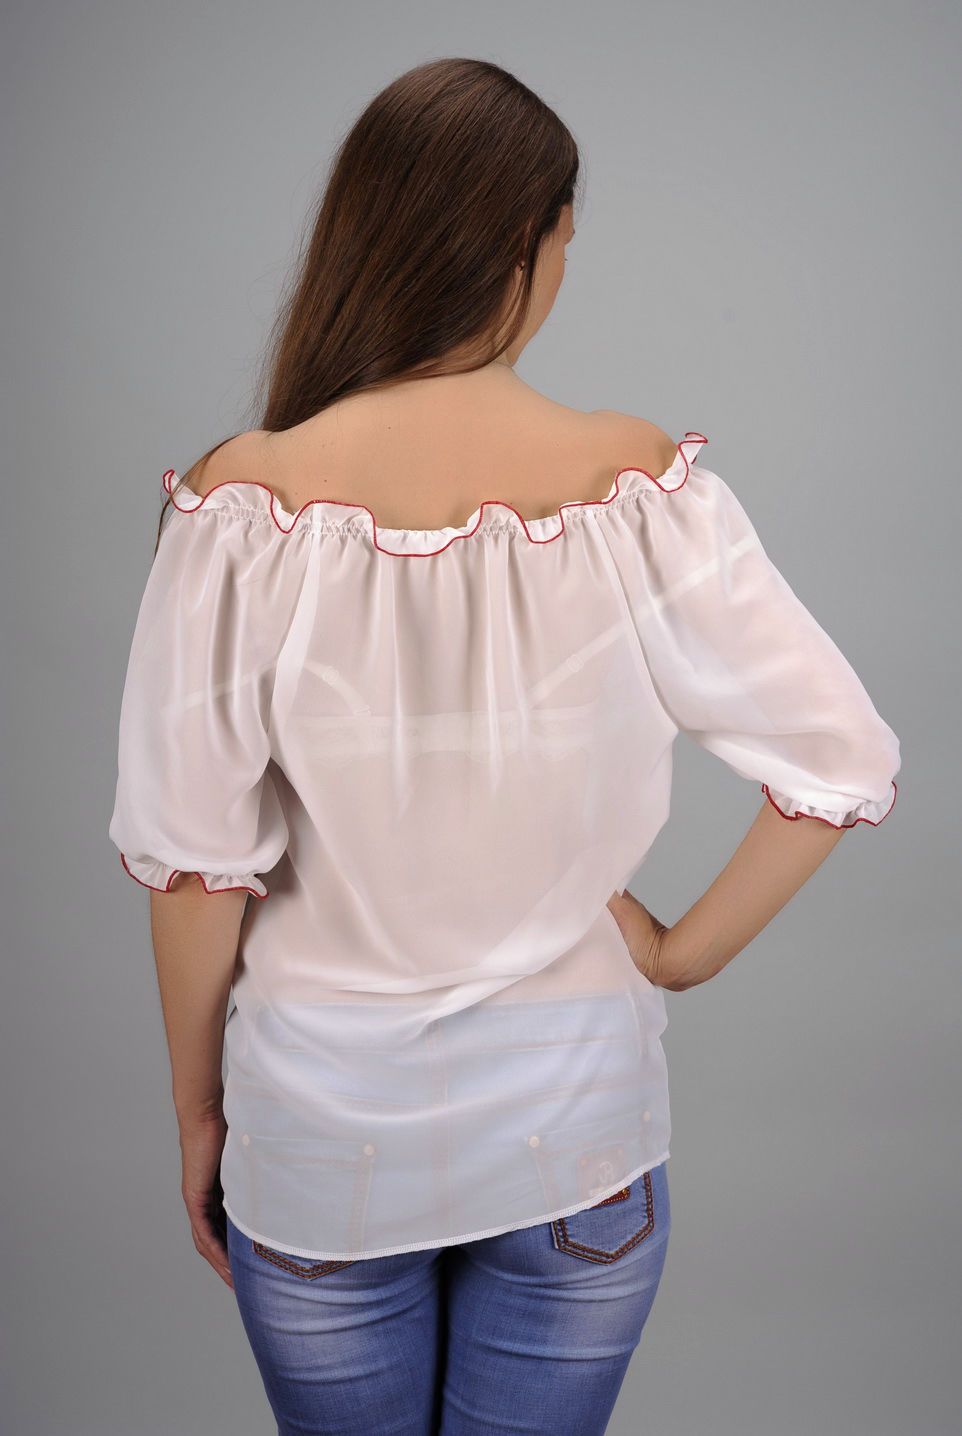 Chiffon blouse with short sleeves photo 3